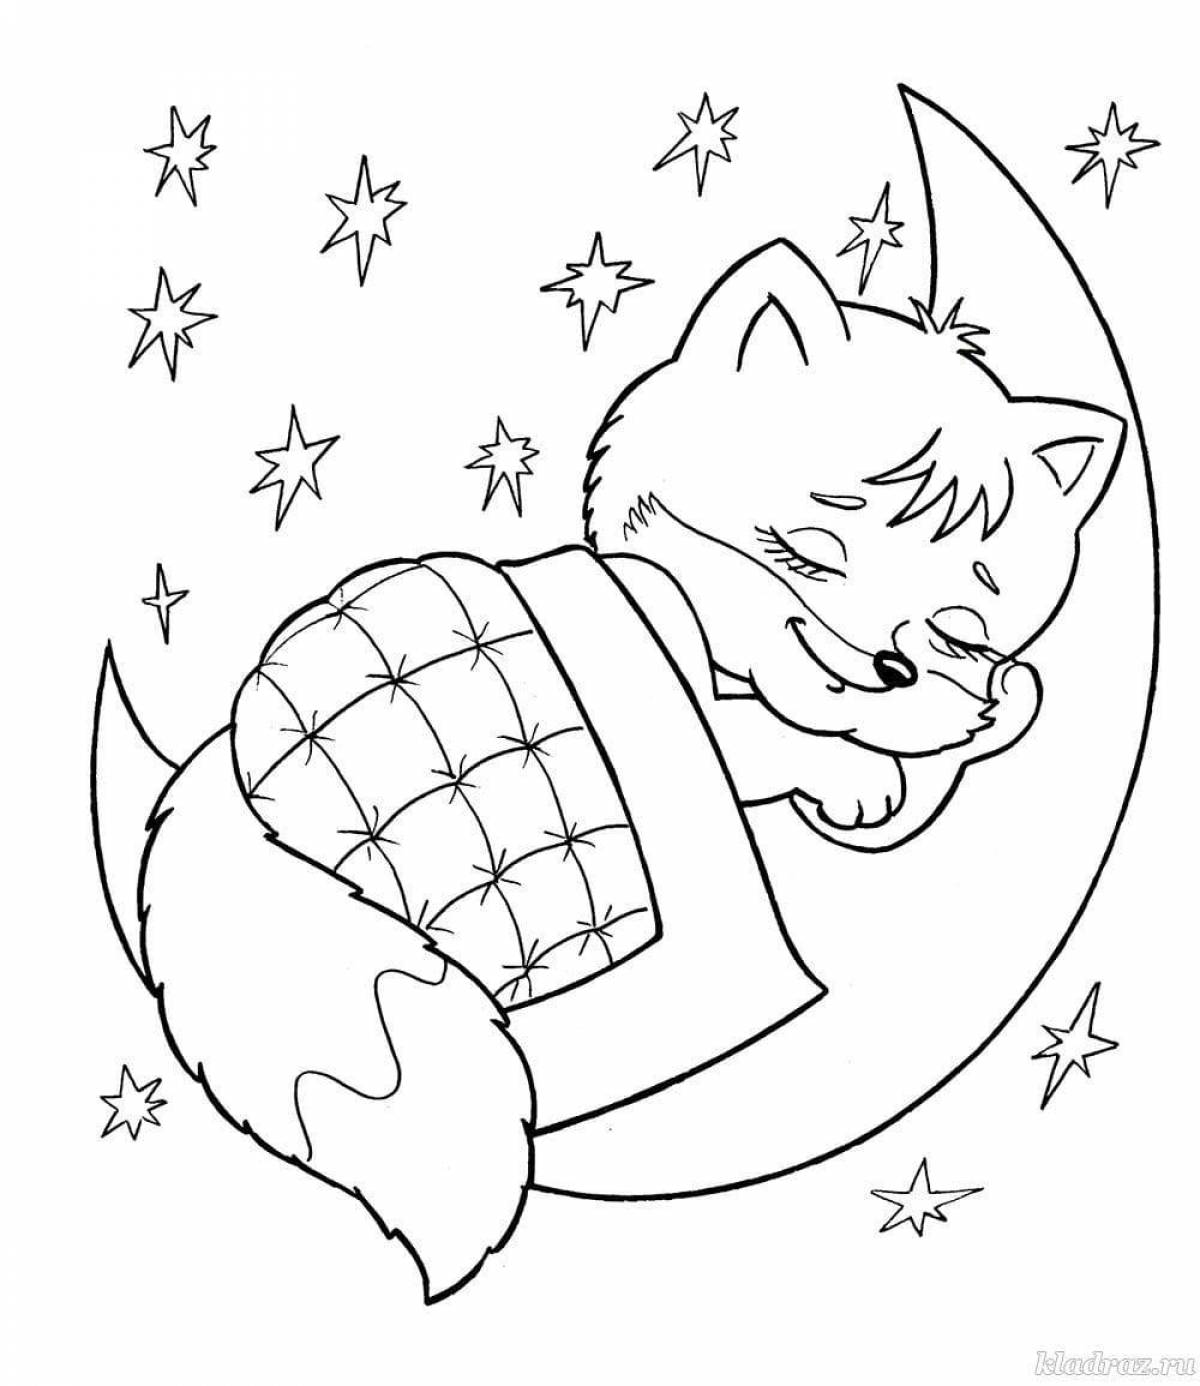 Color-frenzy coloring page for children 5-6 years old